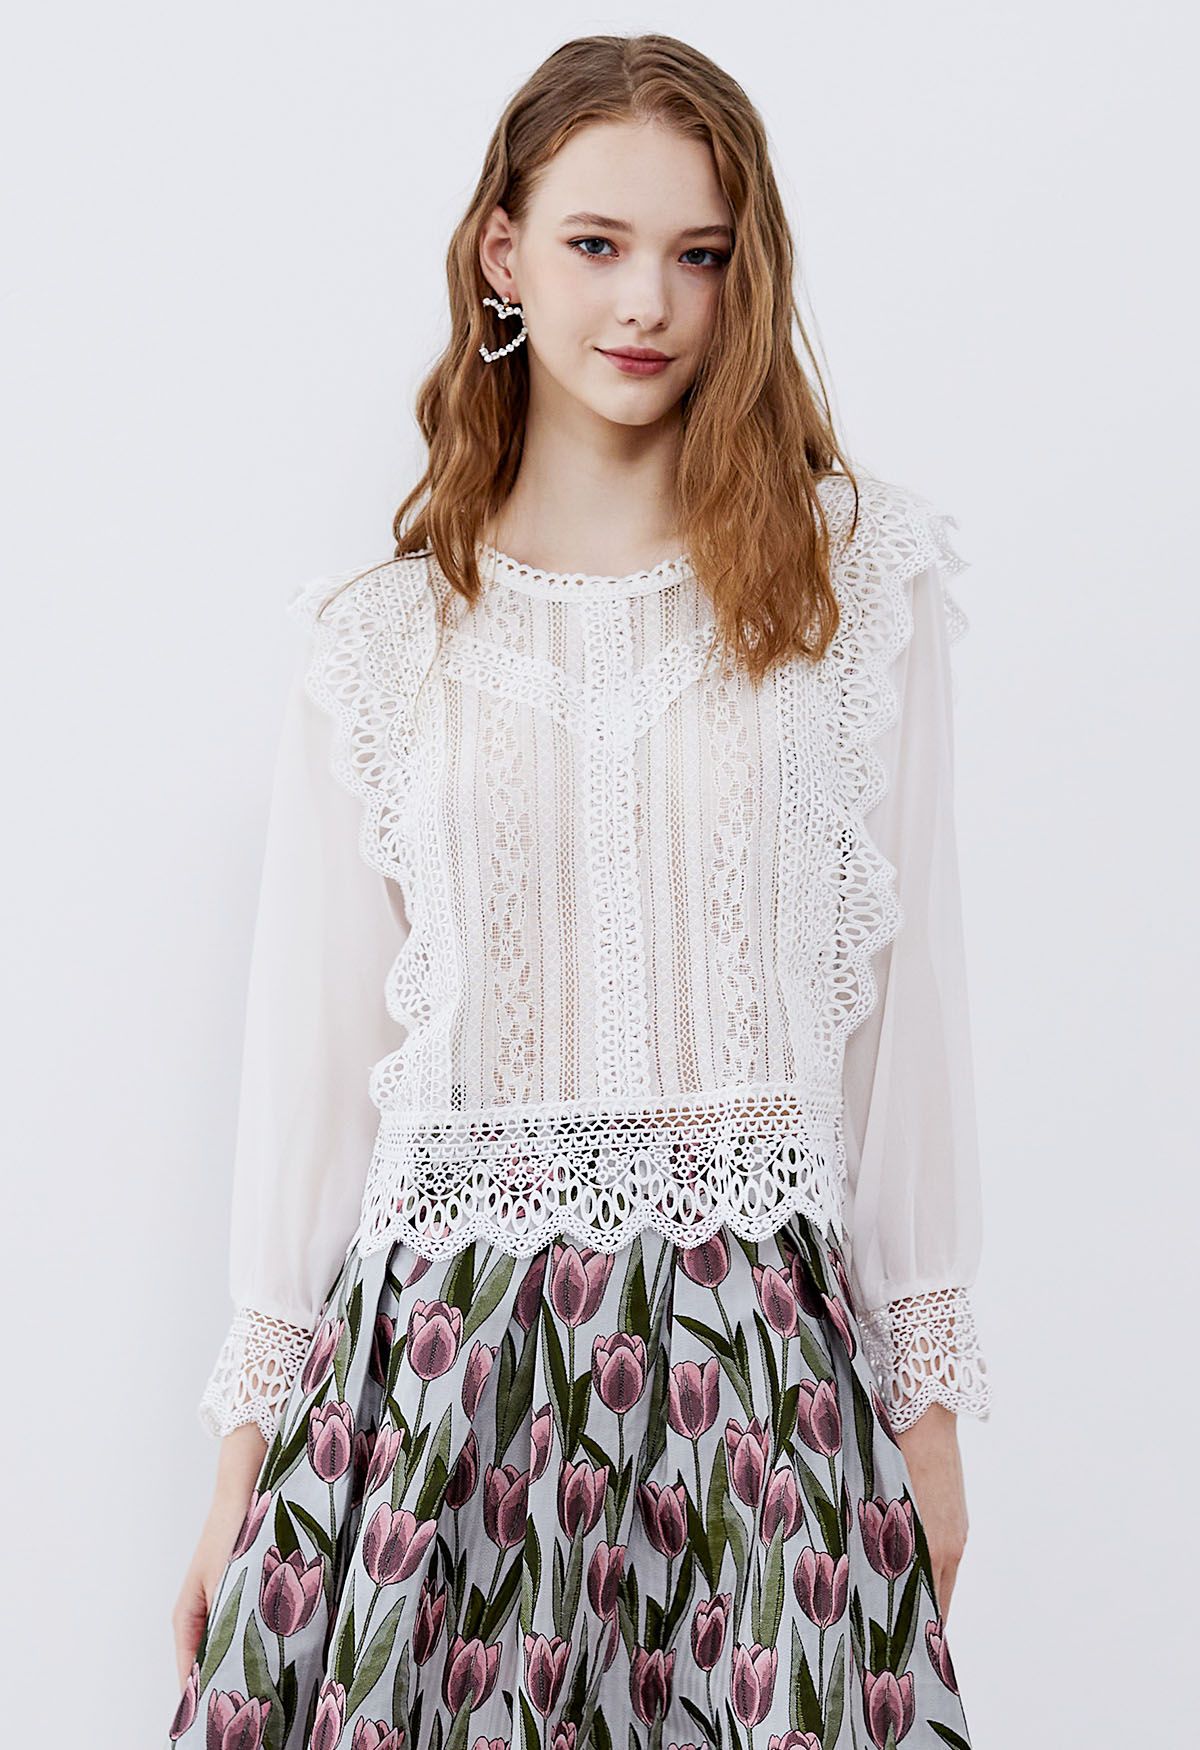 Sheer Sleeve Spliced Cutwork Lace Top in White